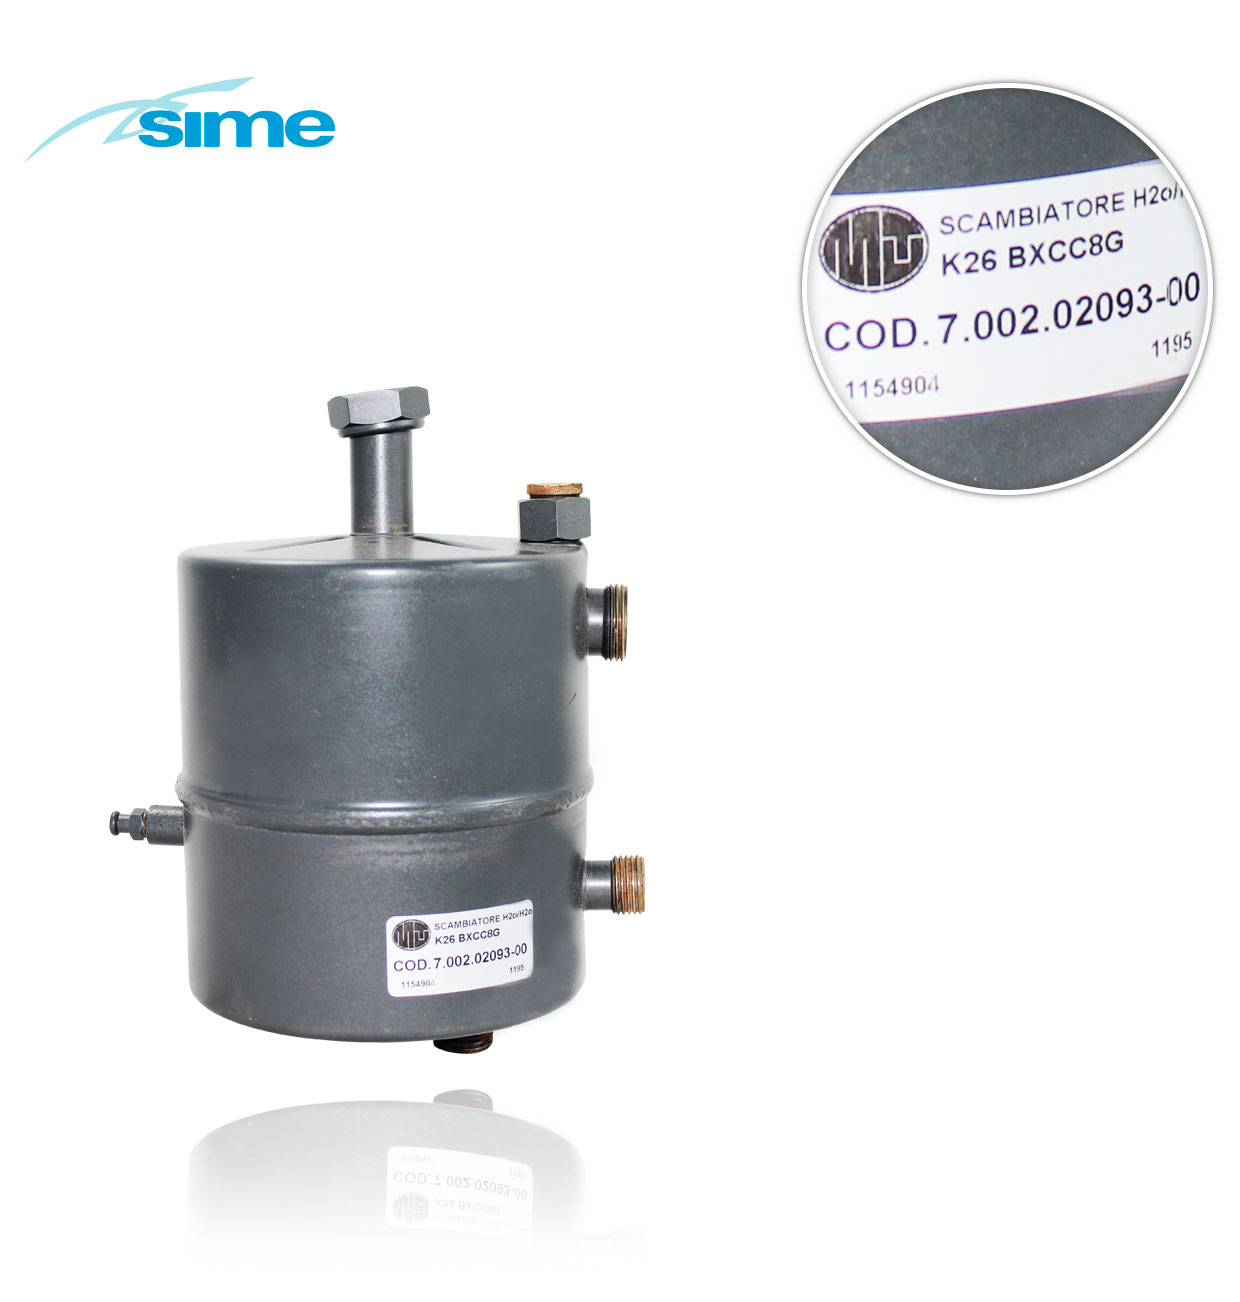 24,000kcal MOD. 33/8 EXCHANGER for SIME